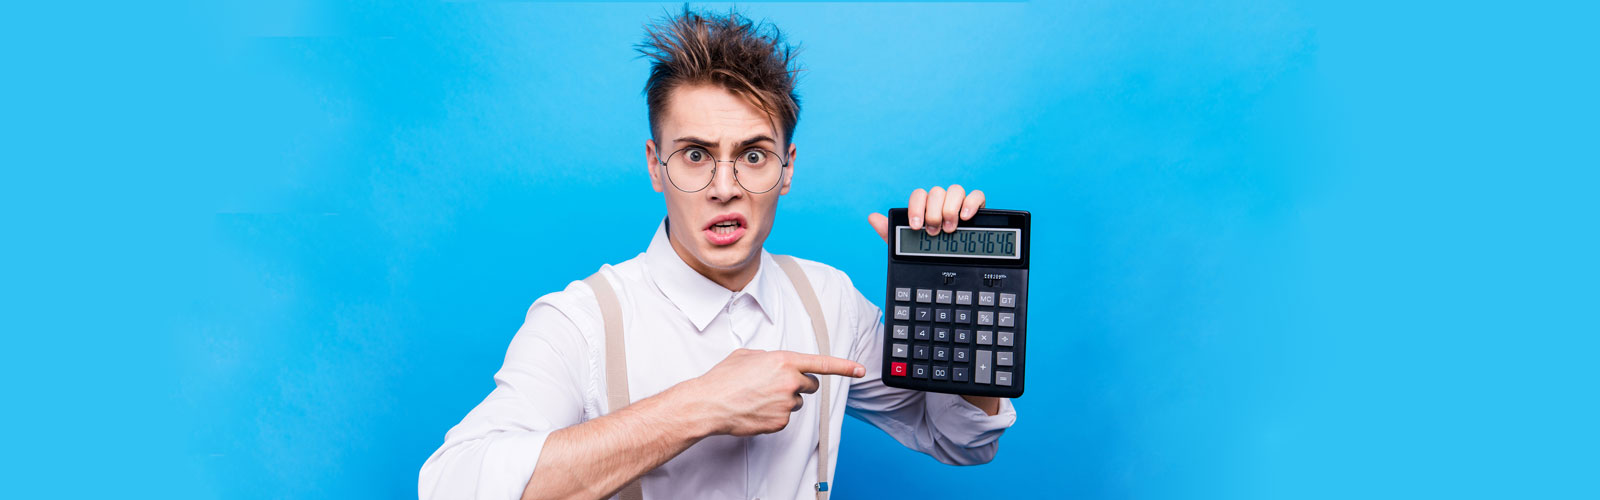 Student holding a calculator